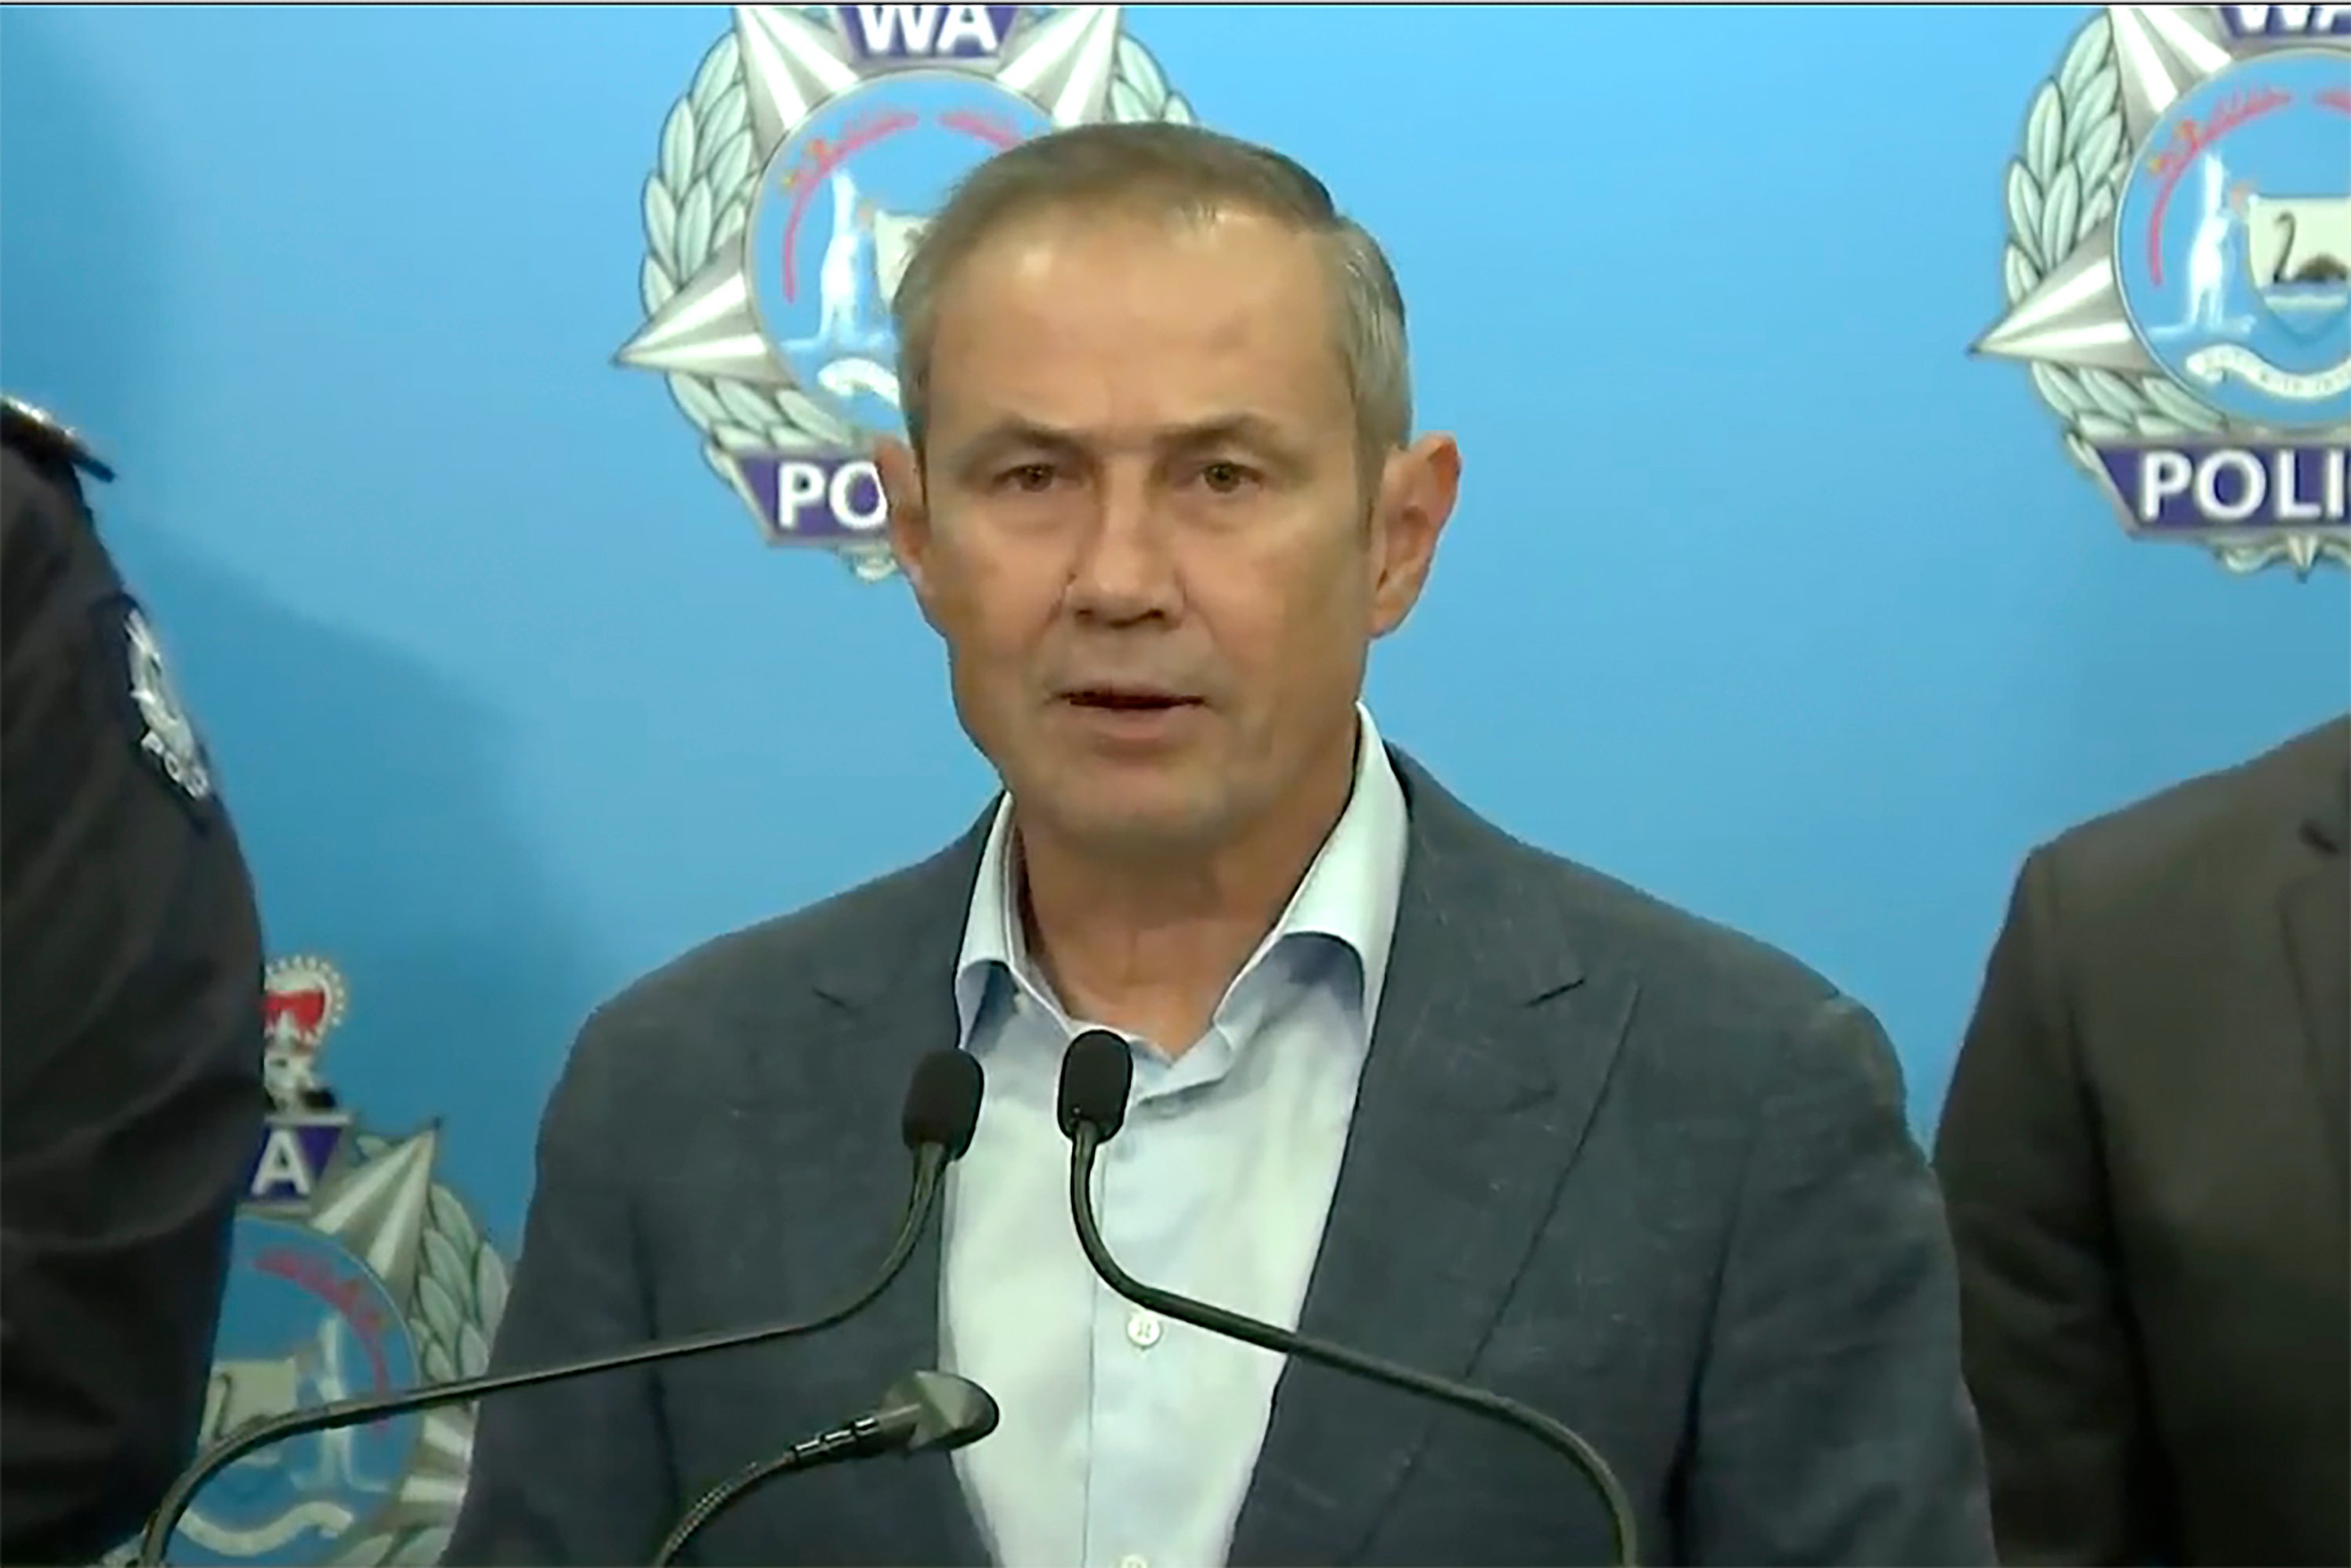 Western Australia premier Roger Cook said there were indications the boy had been radicalised online